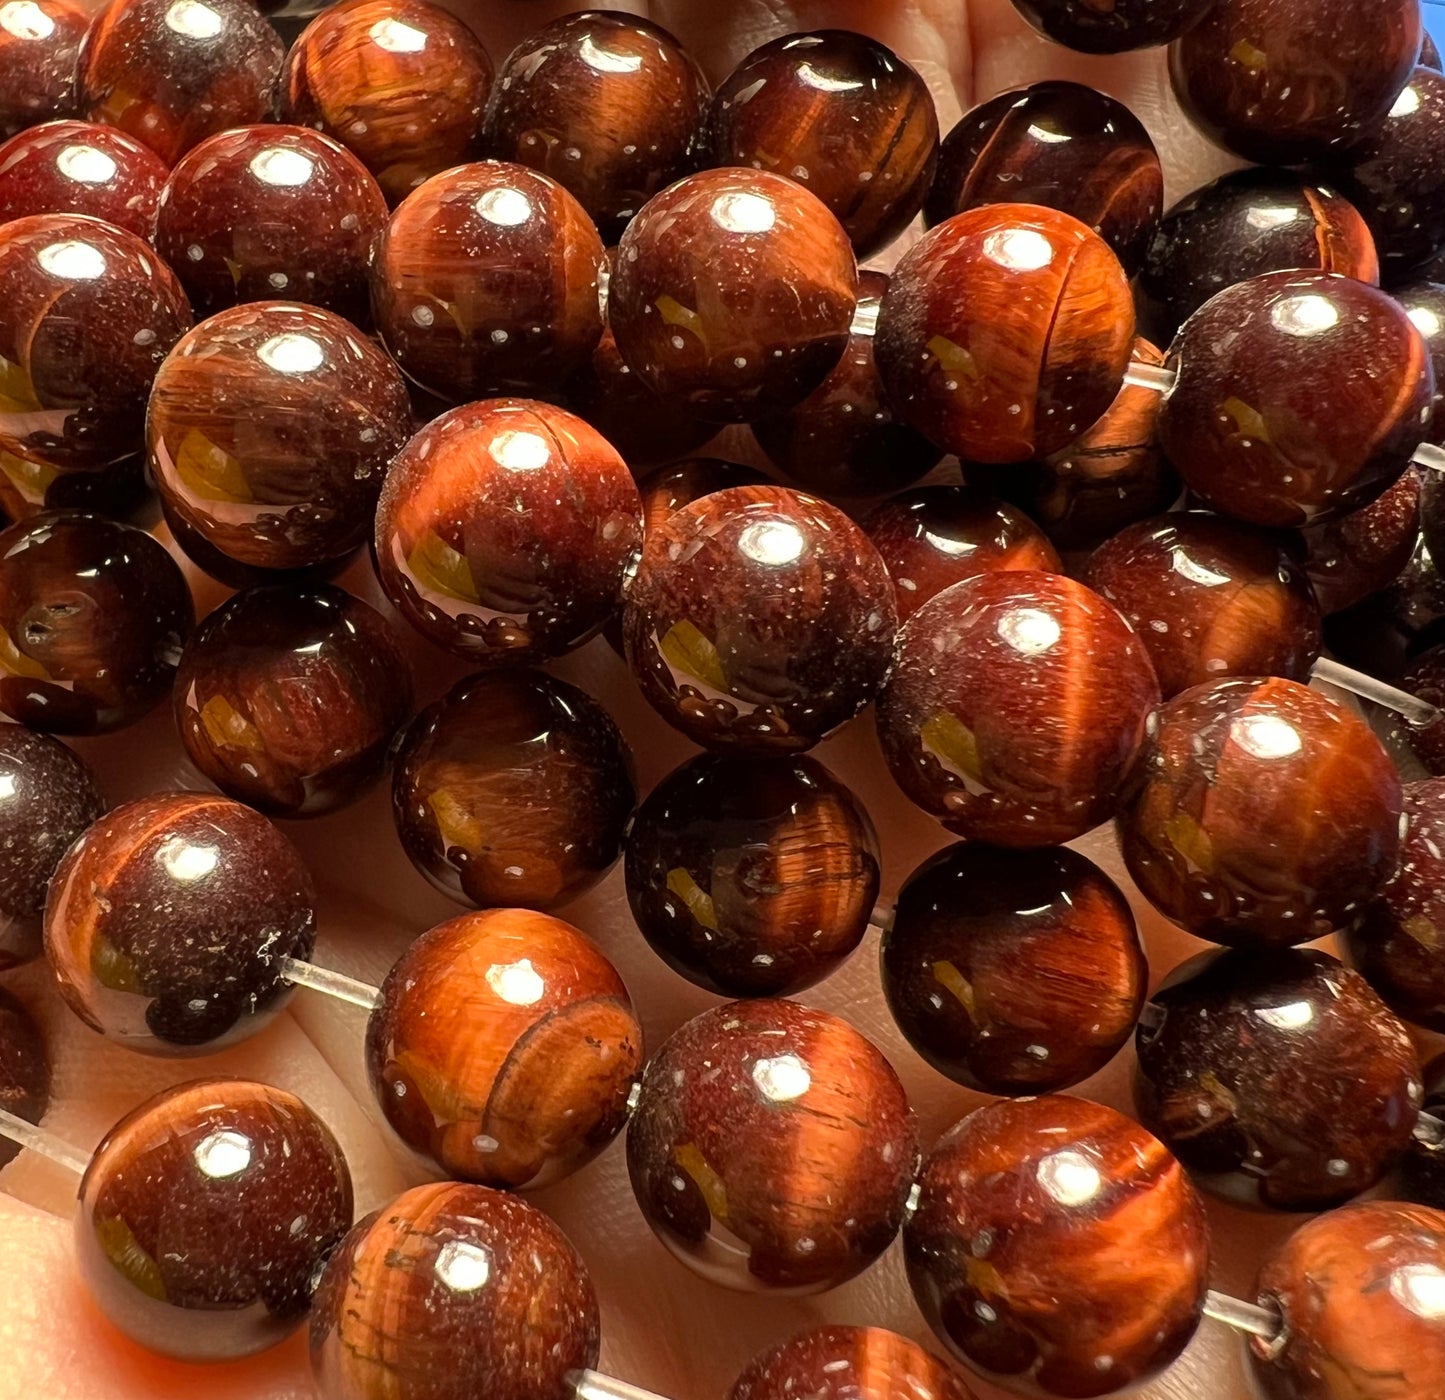 Tiger's Eye Bead/Stone (various colors and sizes)